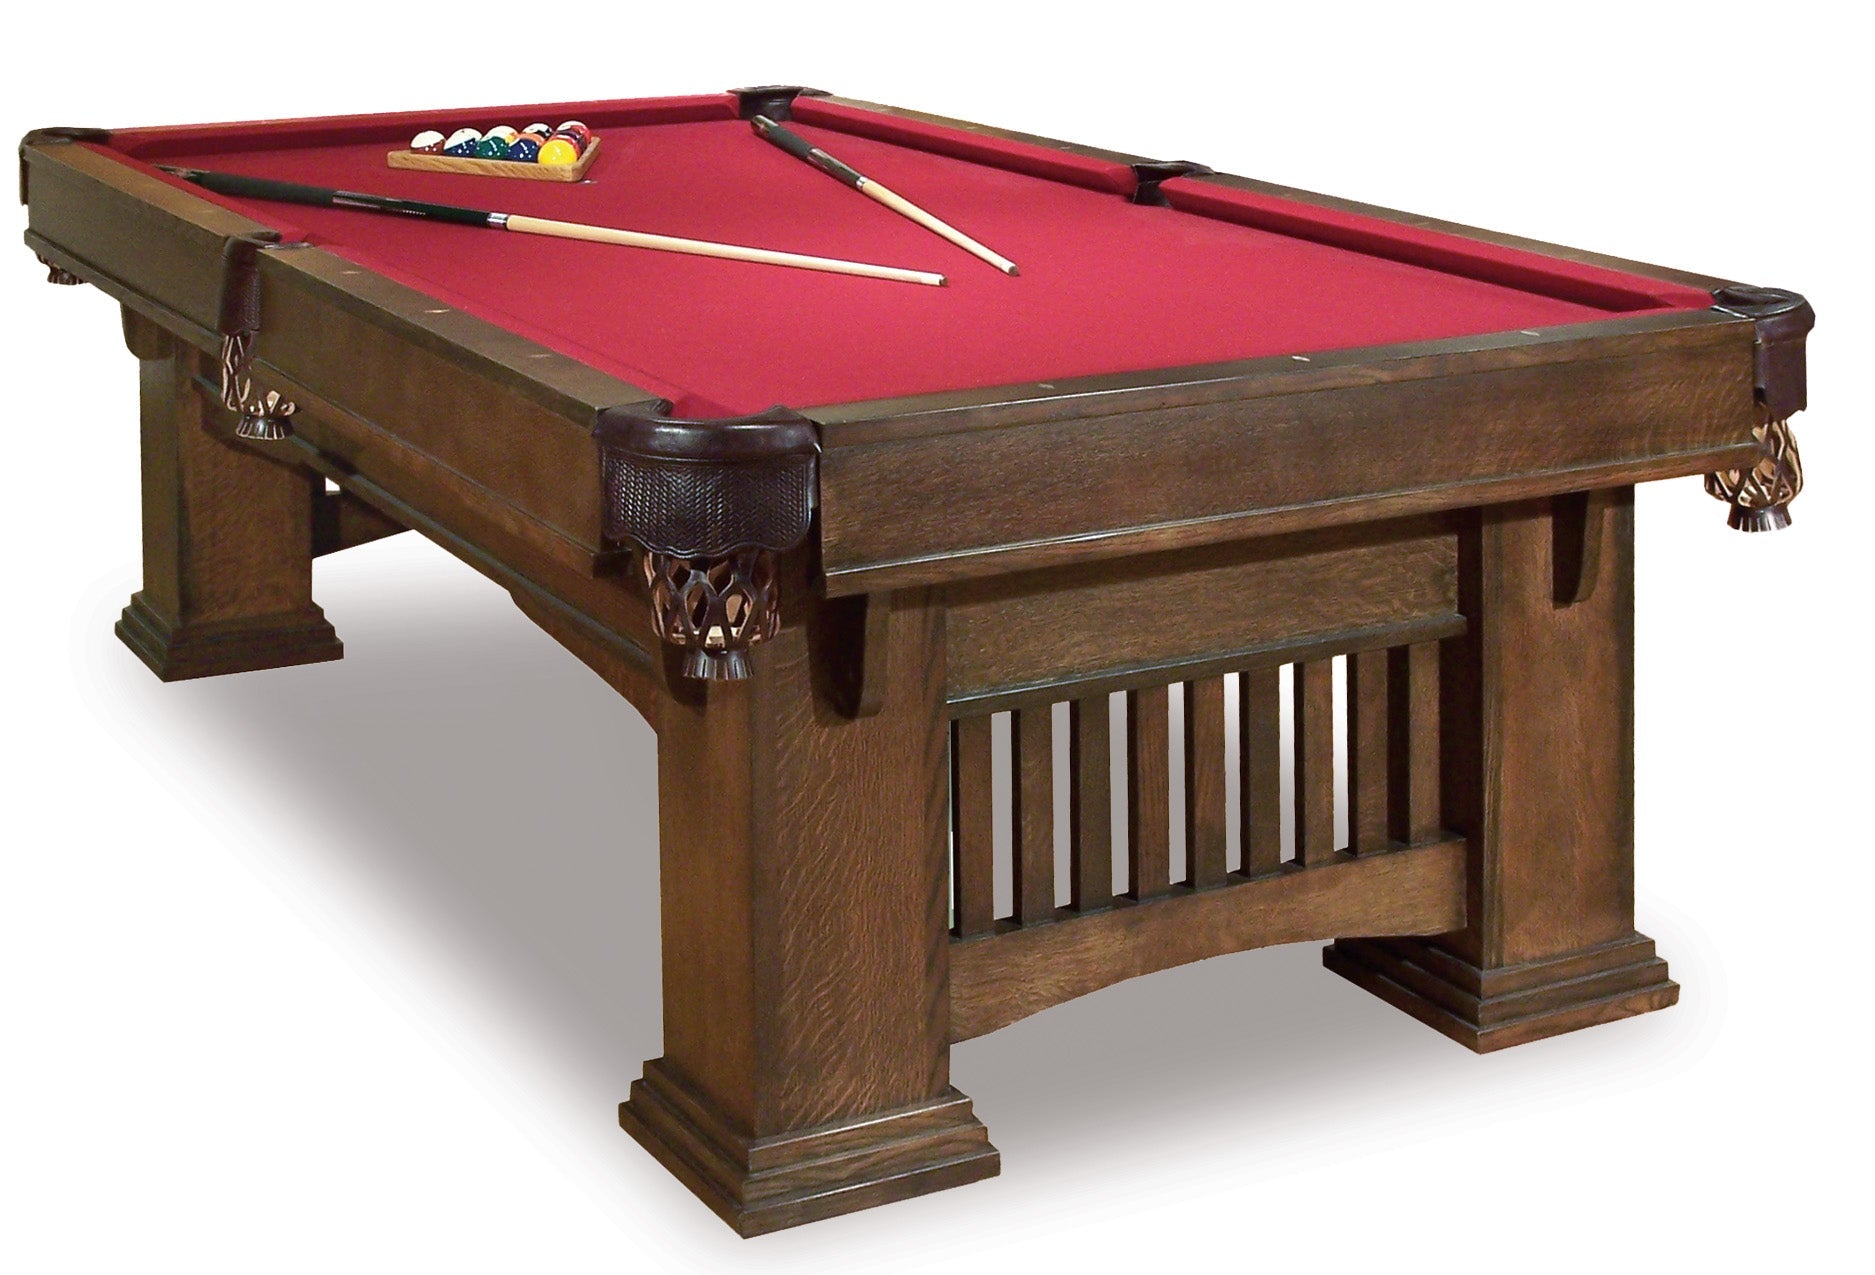 9' Hand-crafted Classic Mission Pool Table (Cherry)